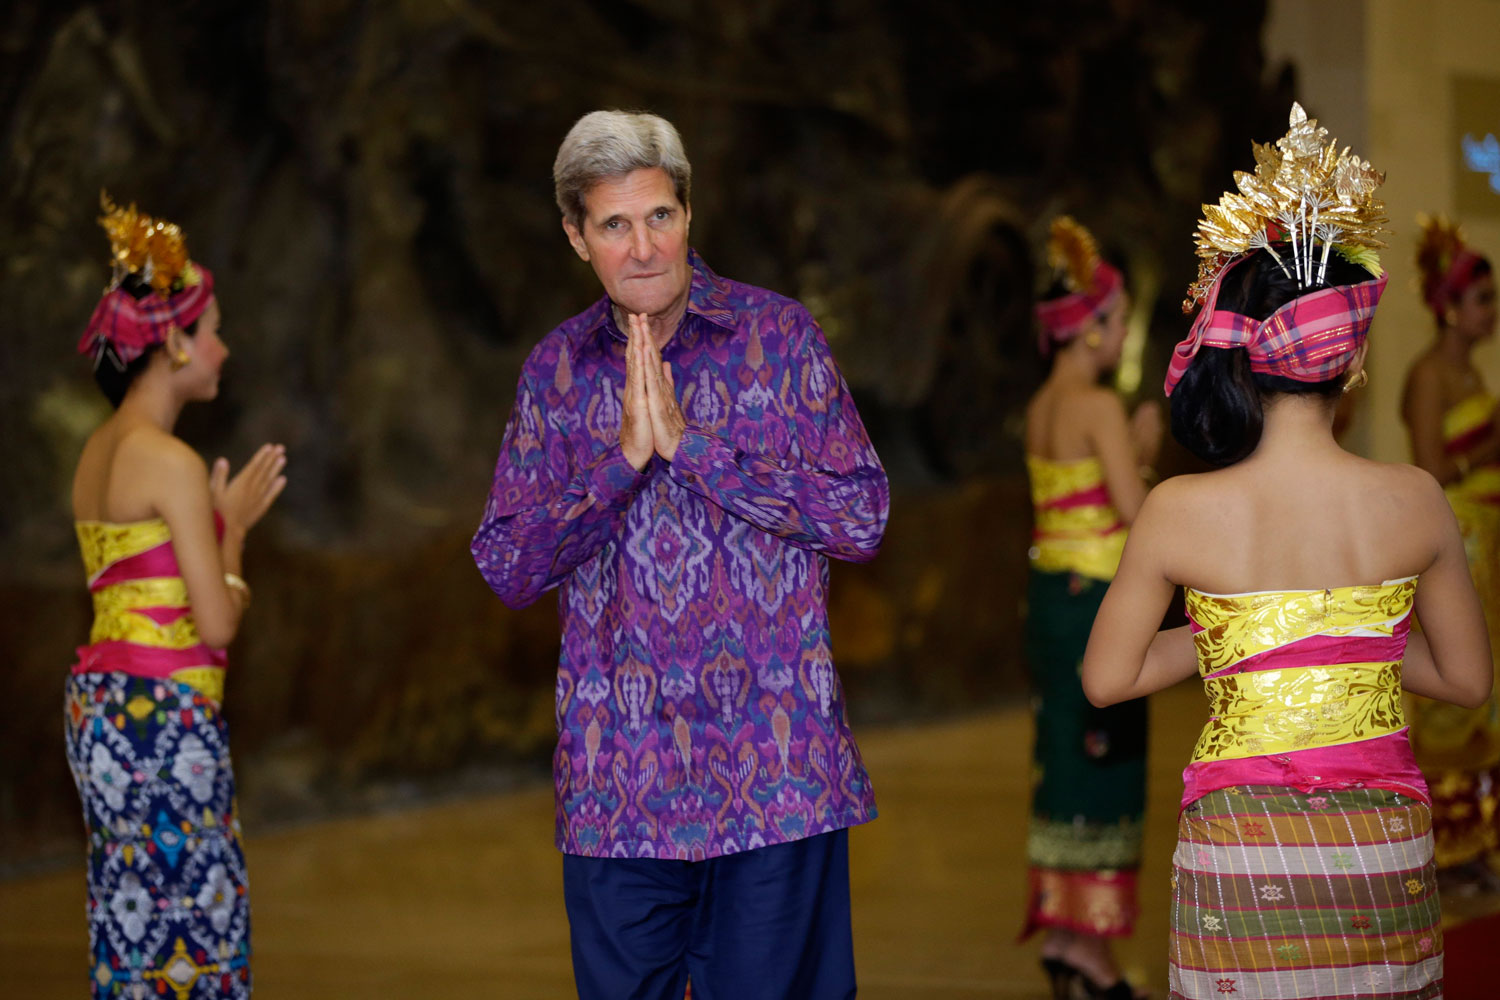 Oct. 7, 2013. U.S. Secretary of State John Kerry, wearing 'endek', a traditional Balinese woven fabric, arrives at a dinner for leaders of the Asia-Pacific Economic Cooperation forum in Bali.